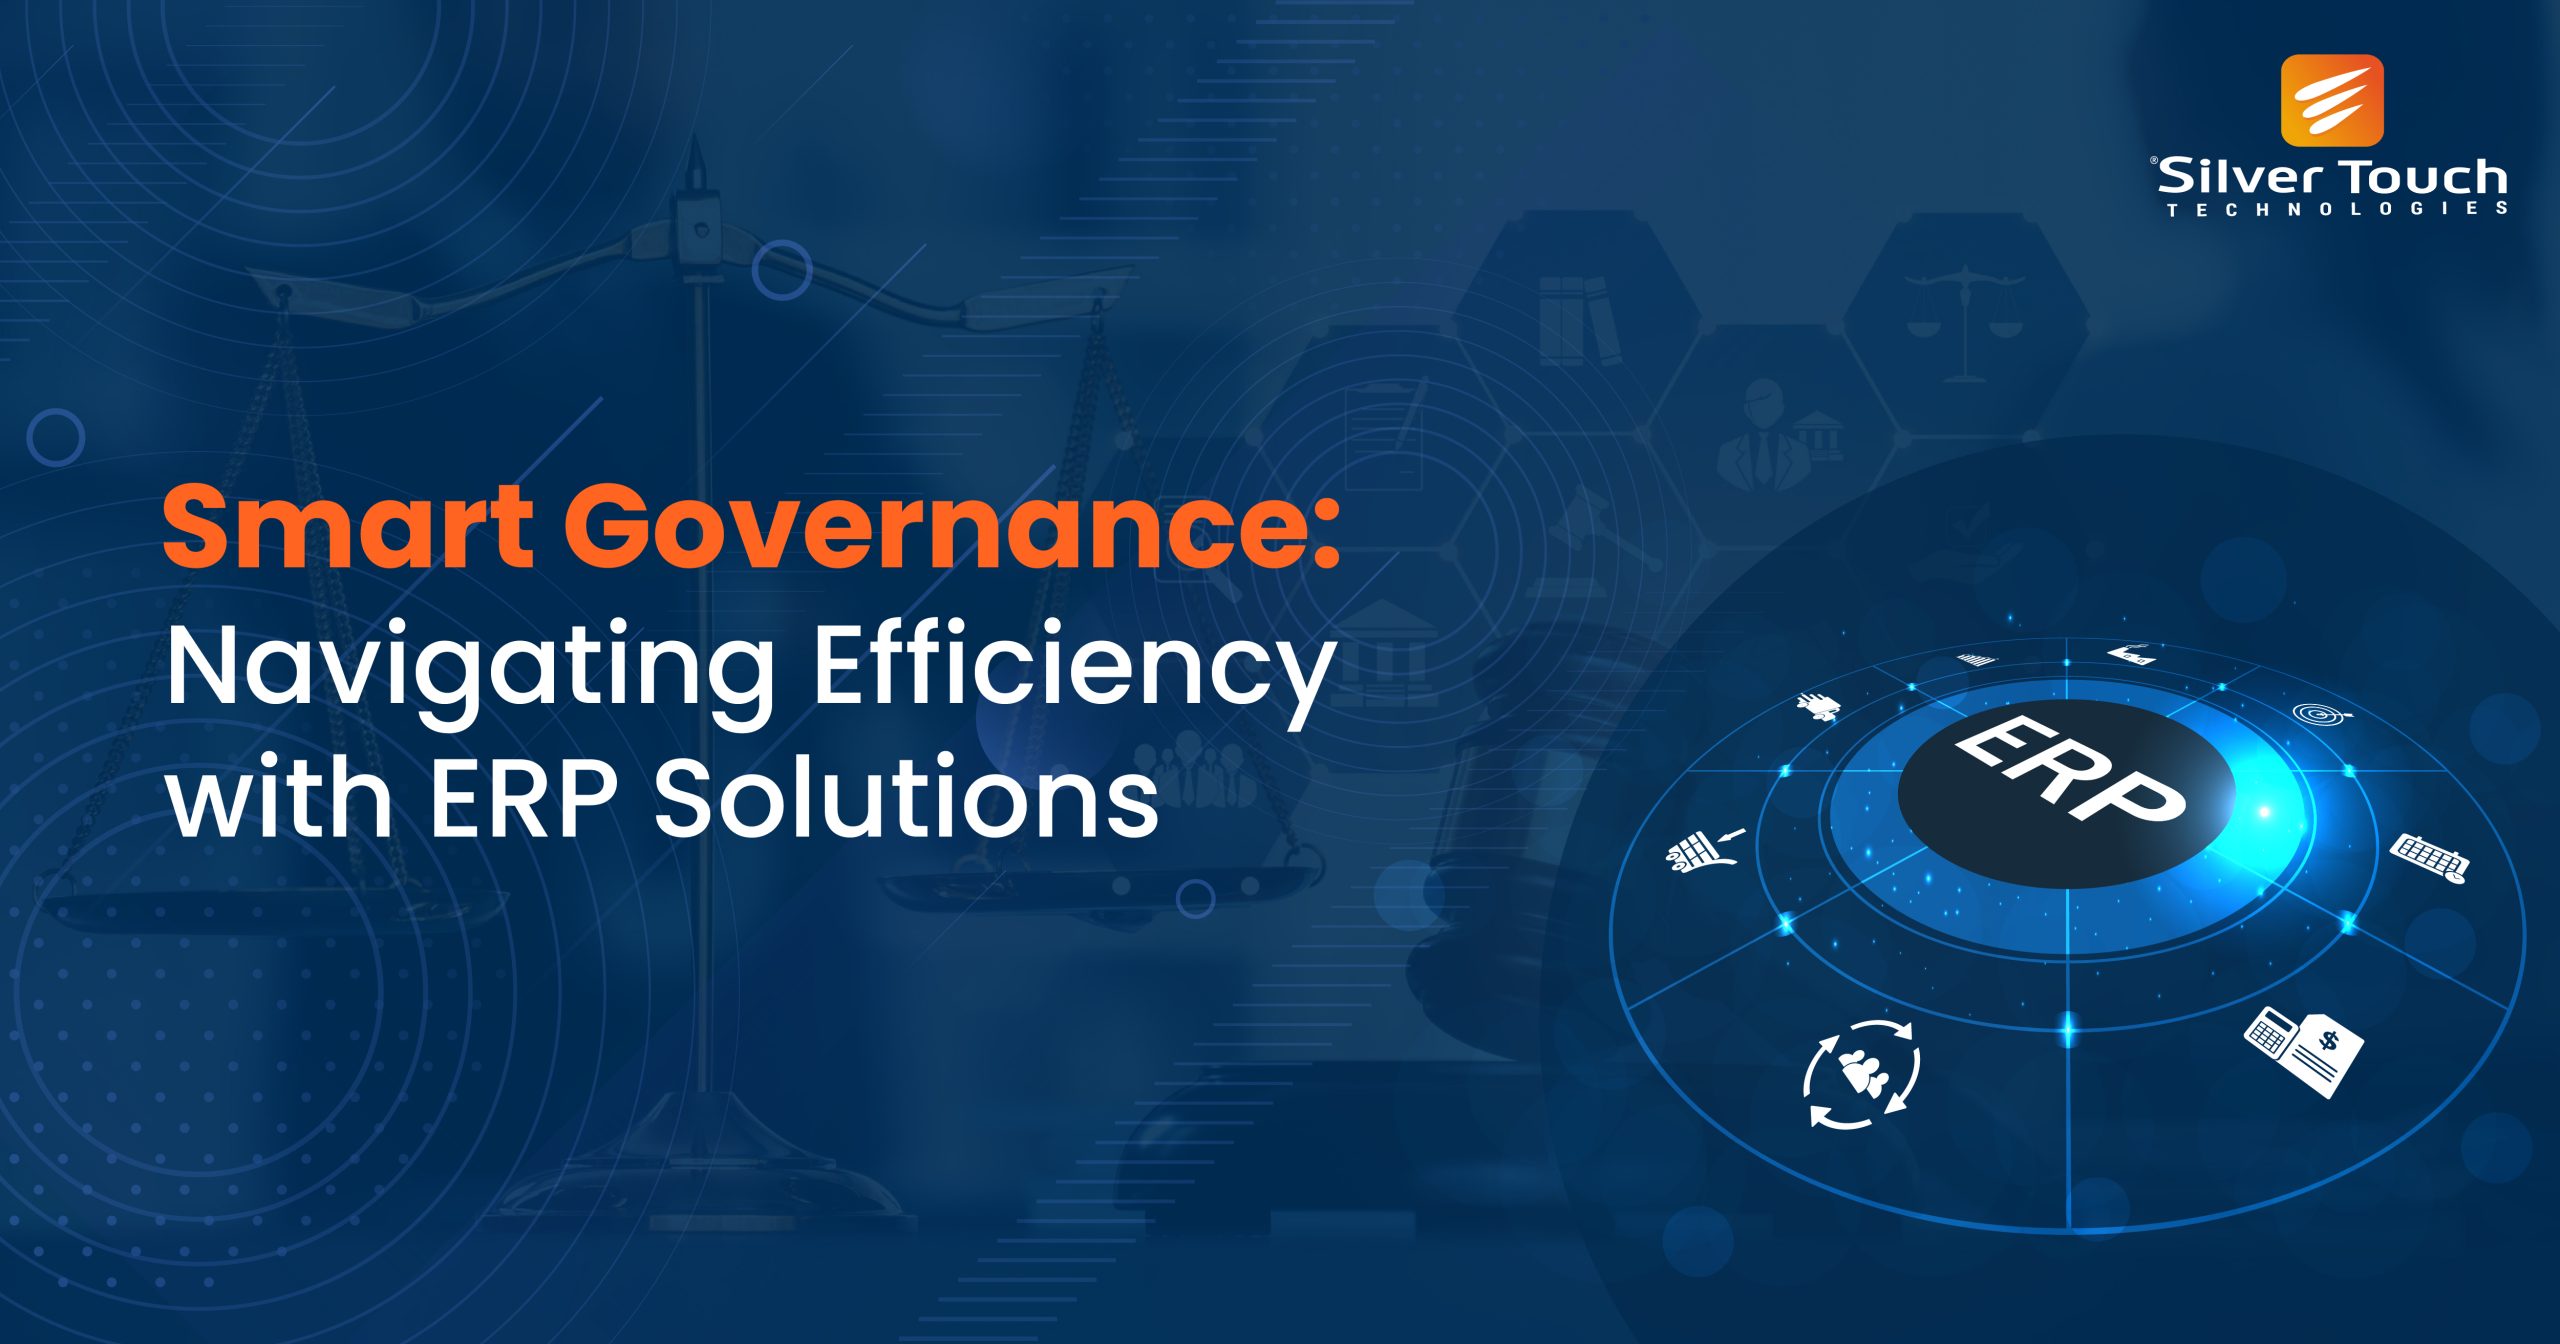 erp solutions for government